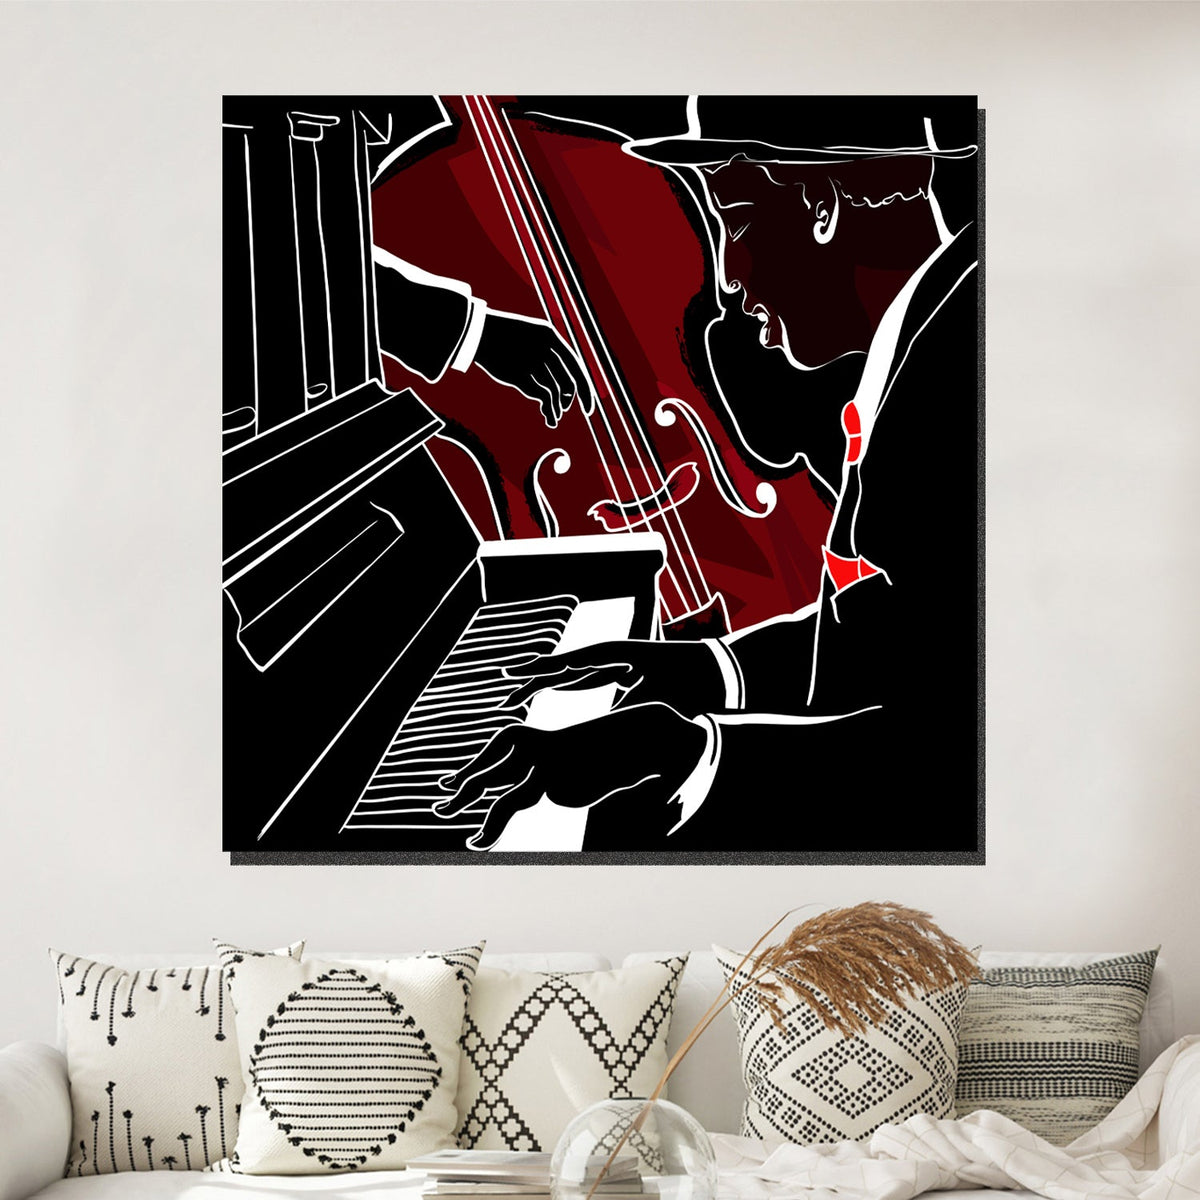 https://cdn.shopify.com/s/files/1/0387/9986/8044/products/PianoandDouble-bassCanvasArtprintStretched-4.jpg